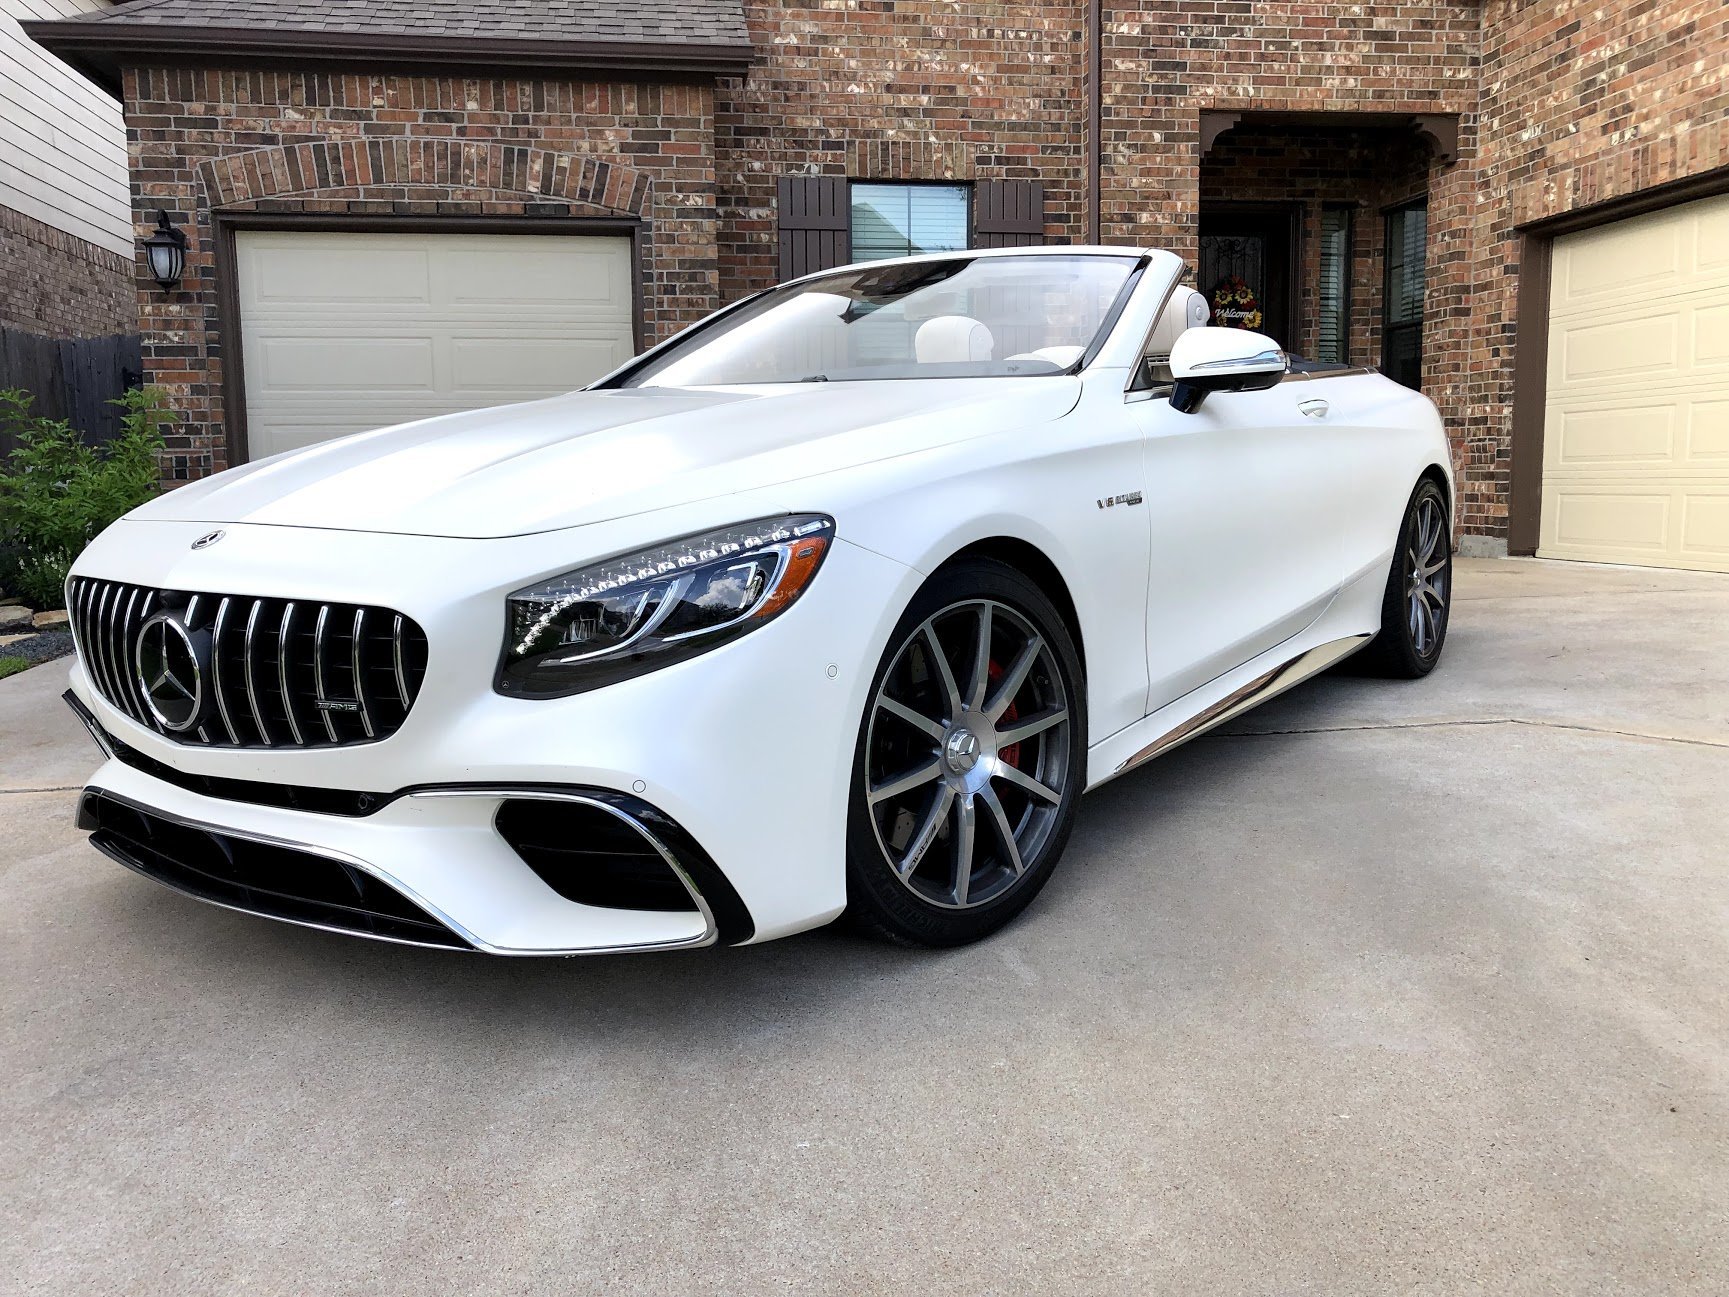 2019 Mercedes-Benz AMG S63 Cabriolet - S:S:L Review - Speed:Sport:Life